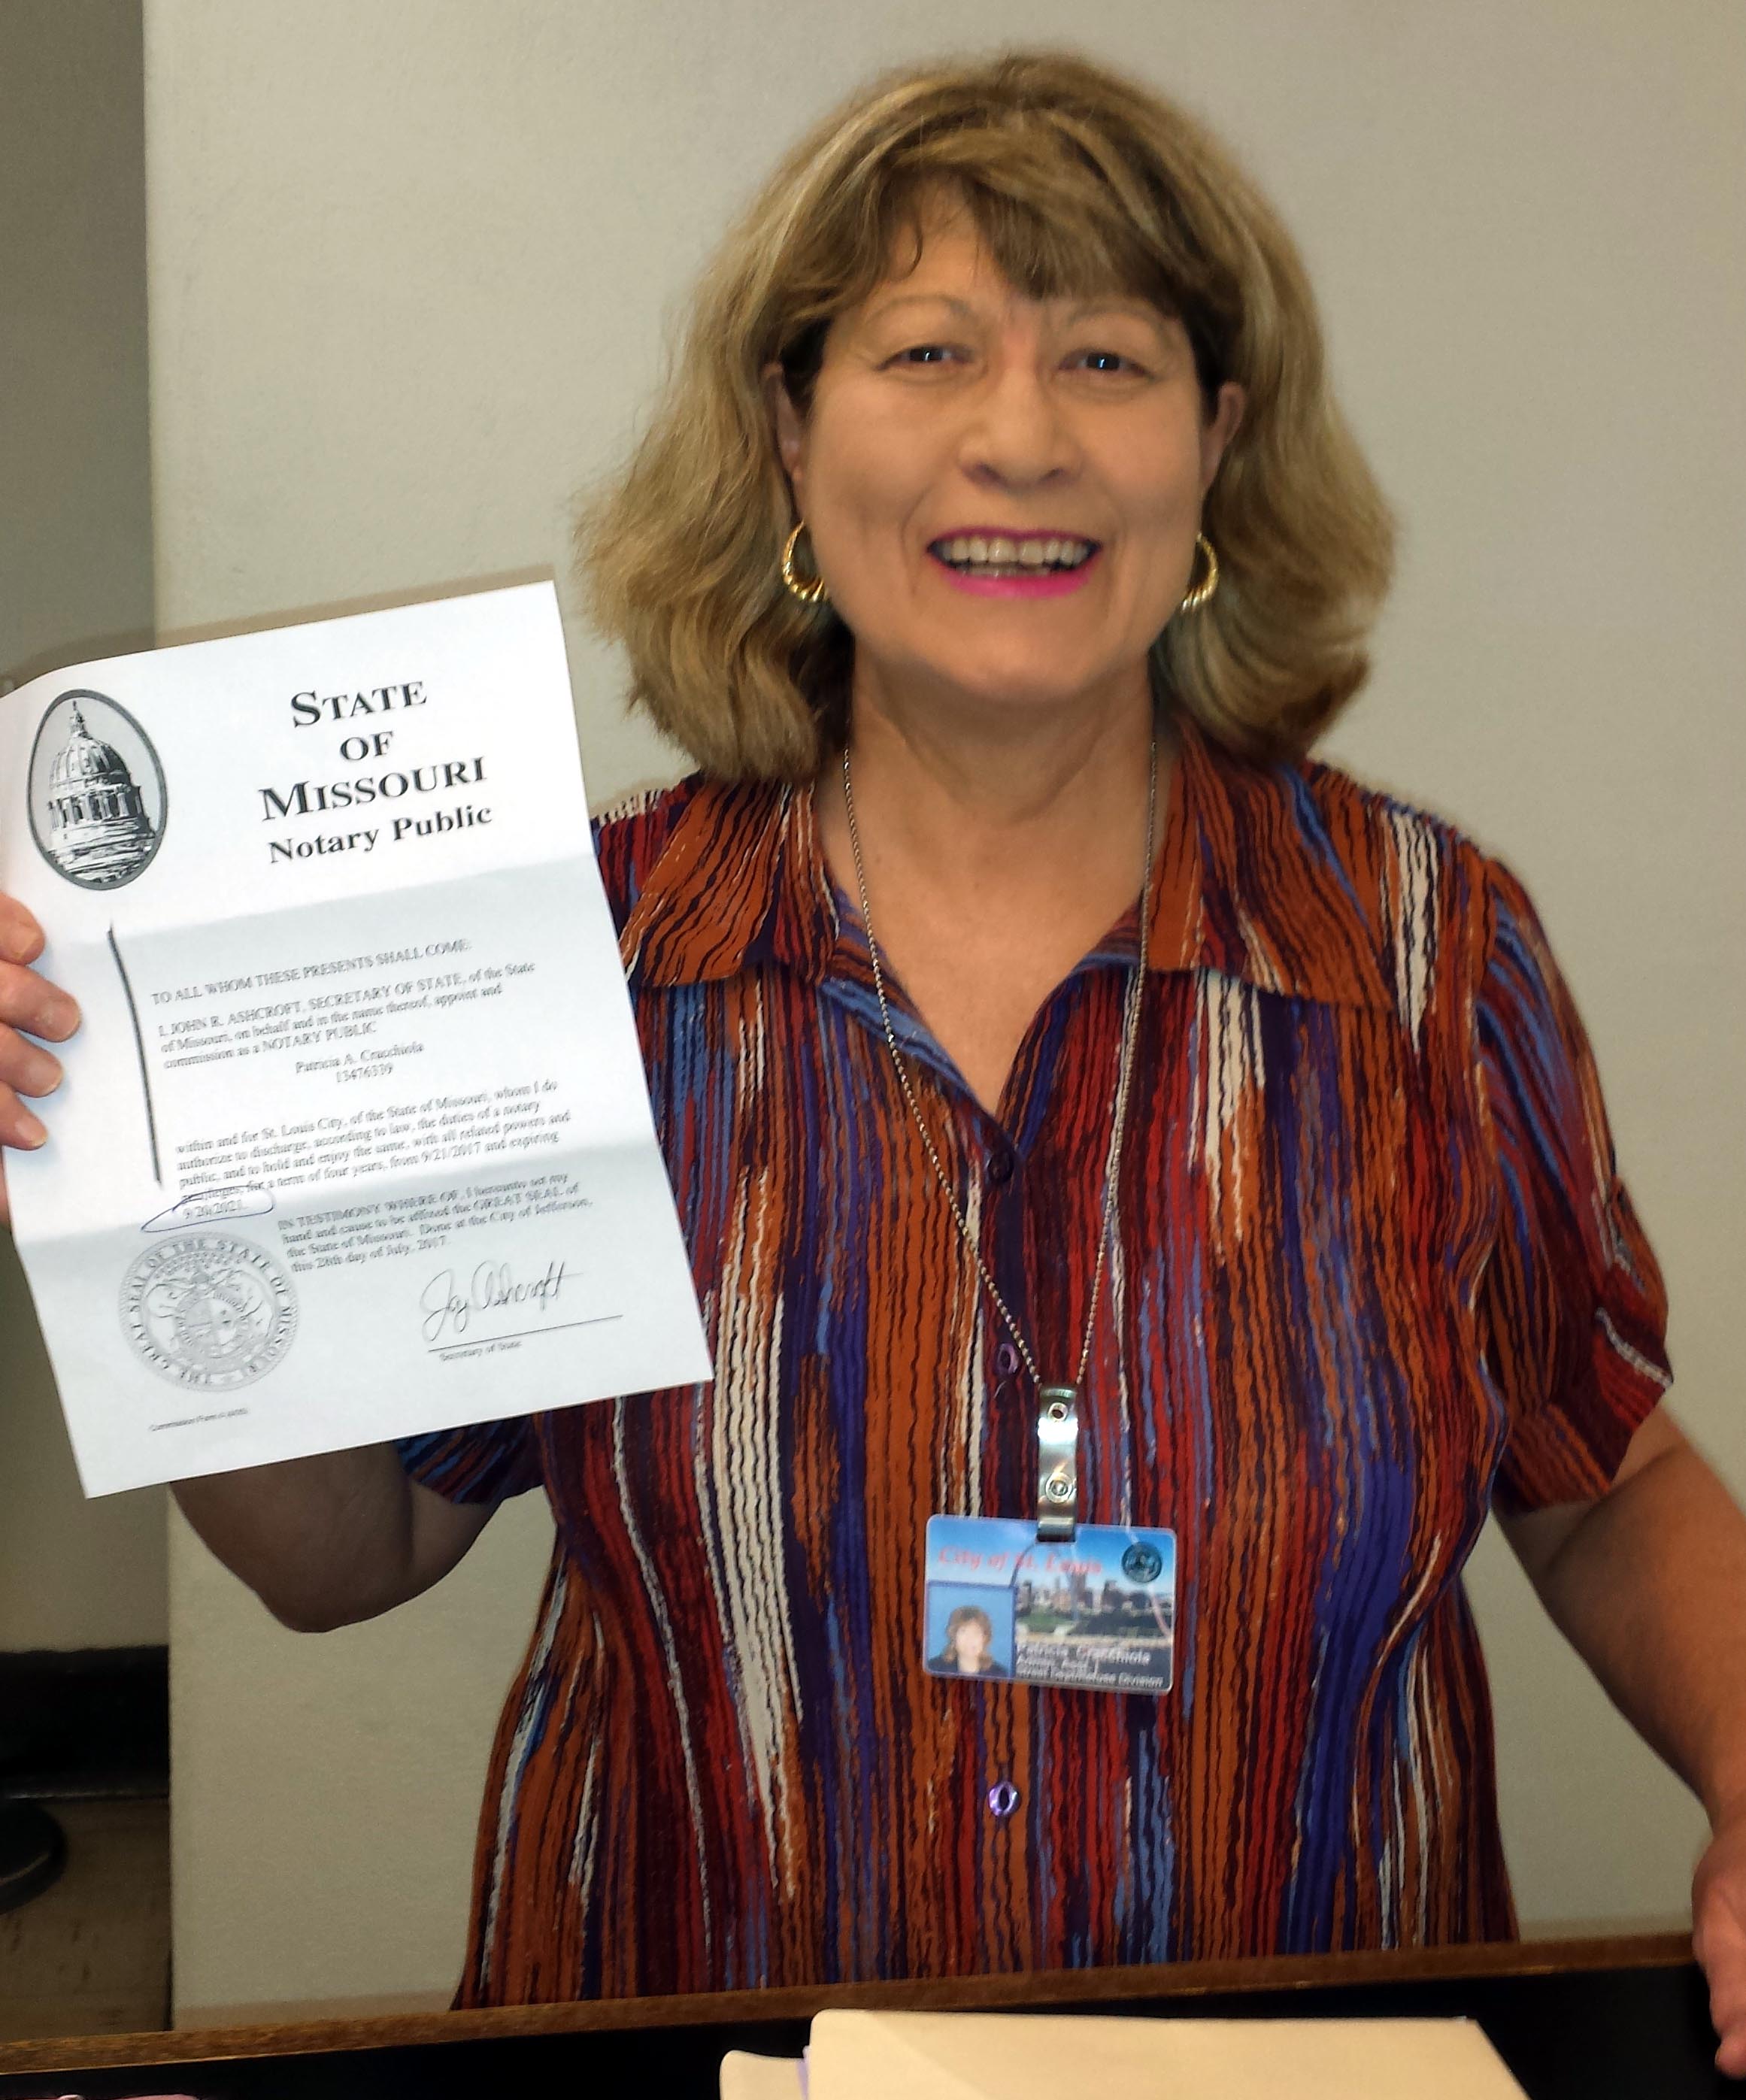 Patricia A. Cracchiola receives her Notary Public Renewal Commission